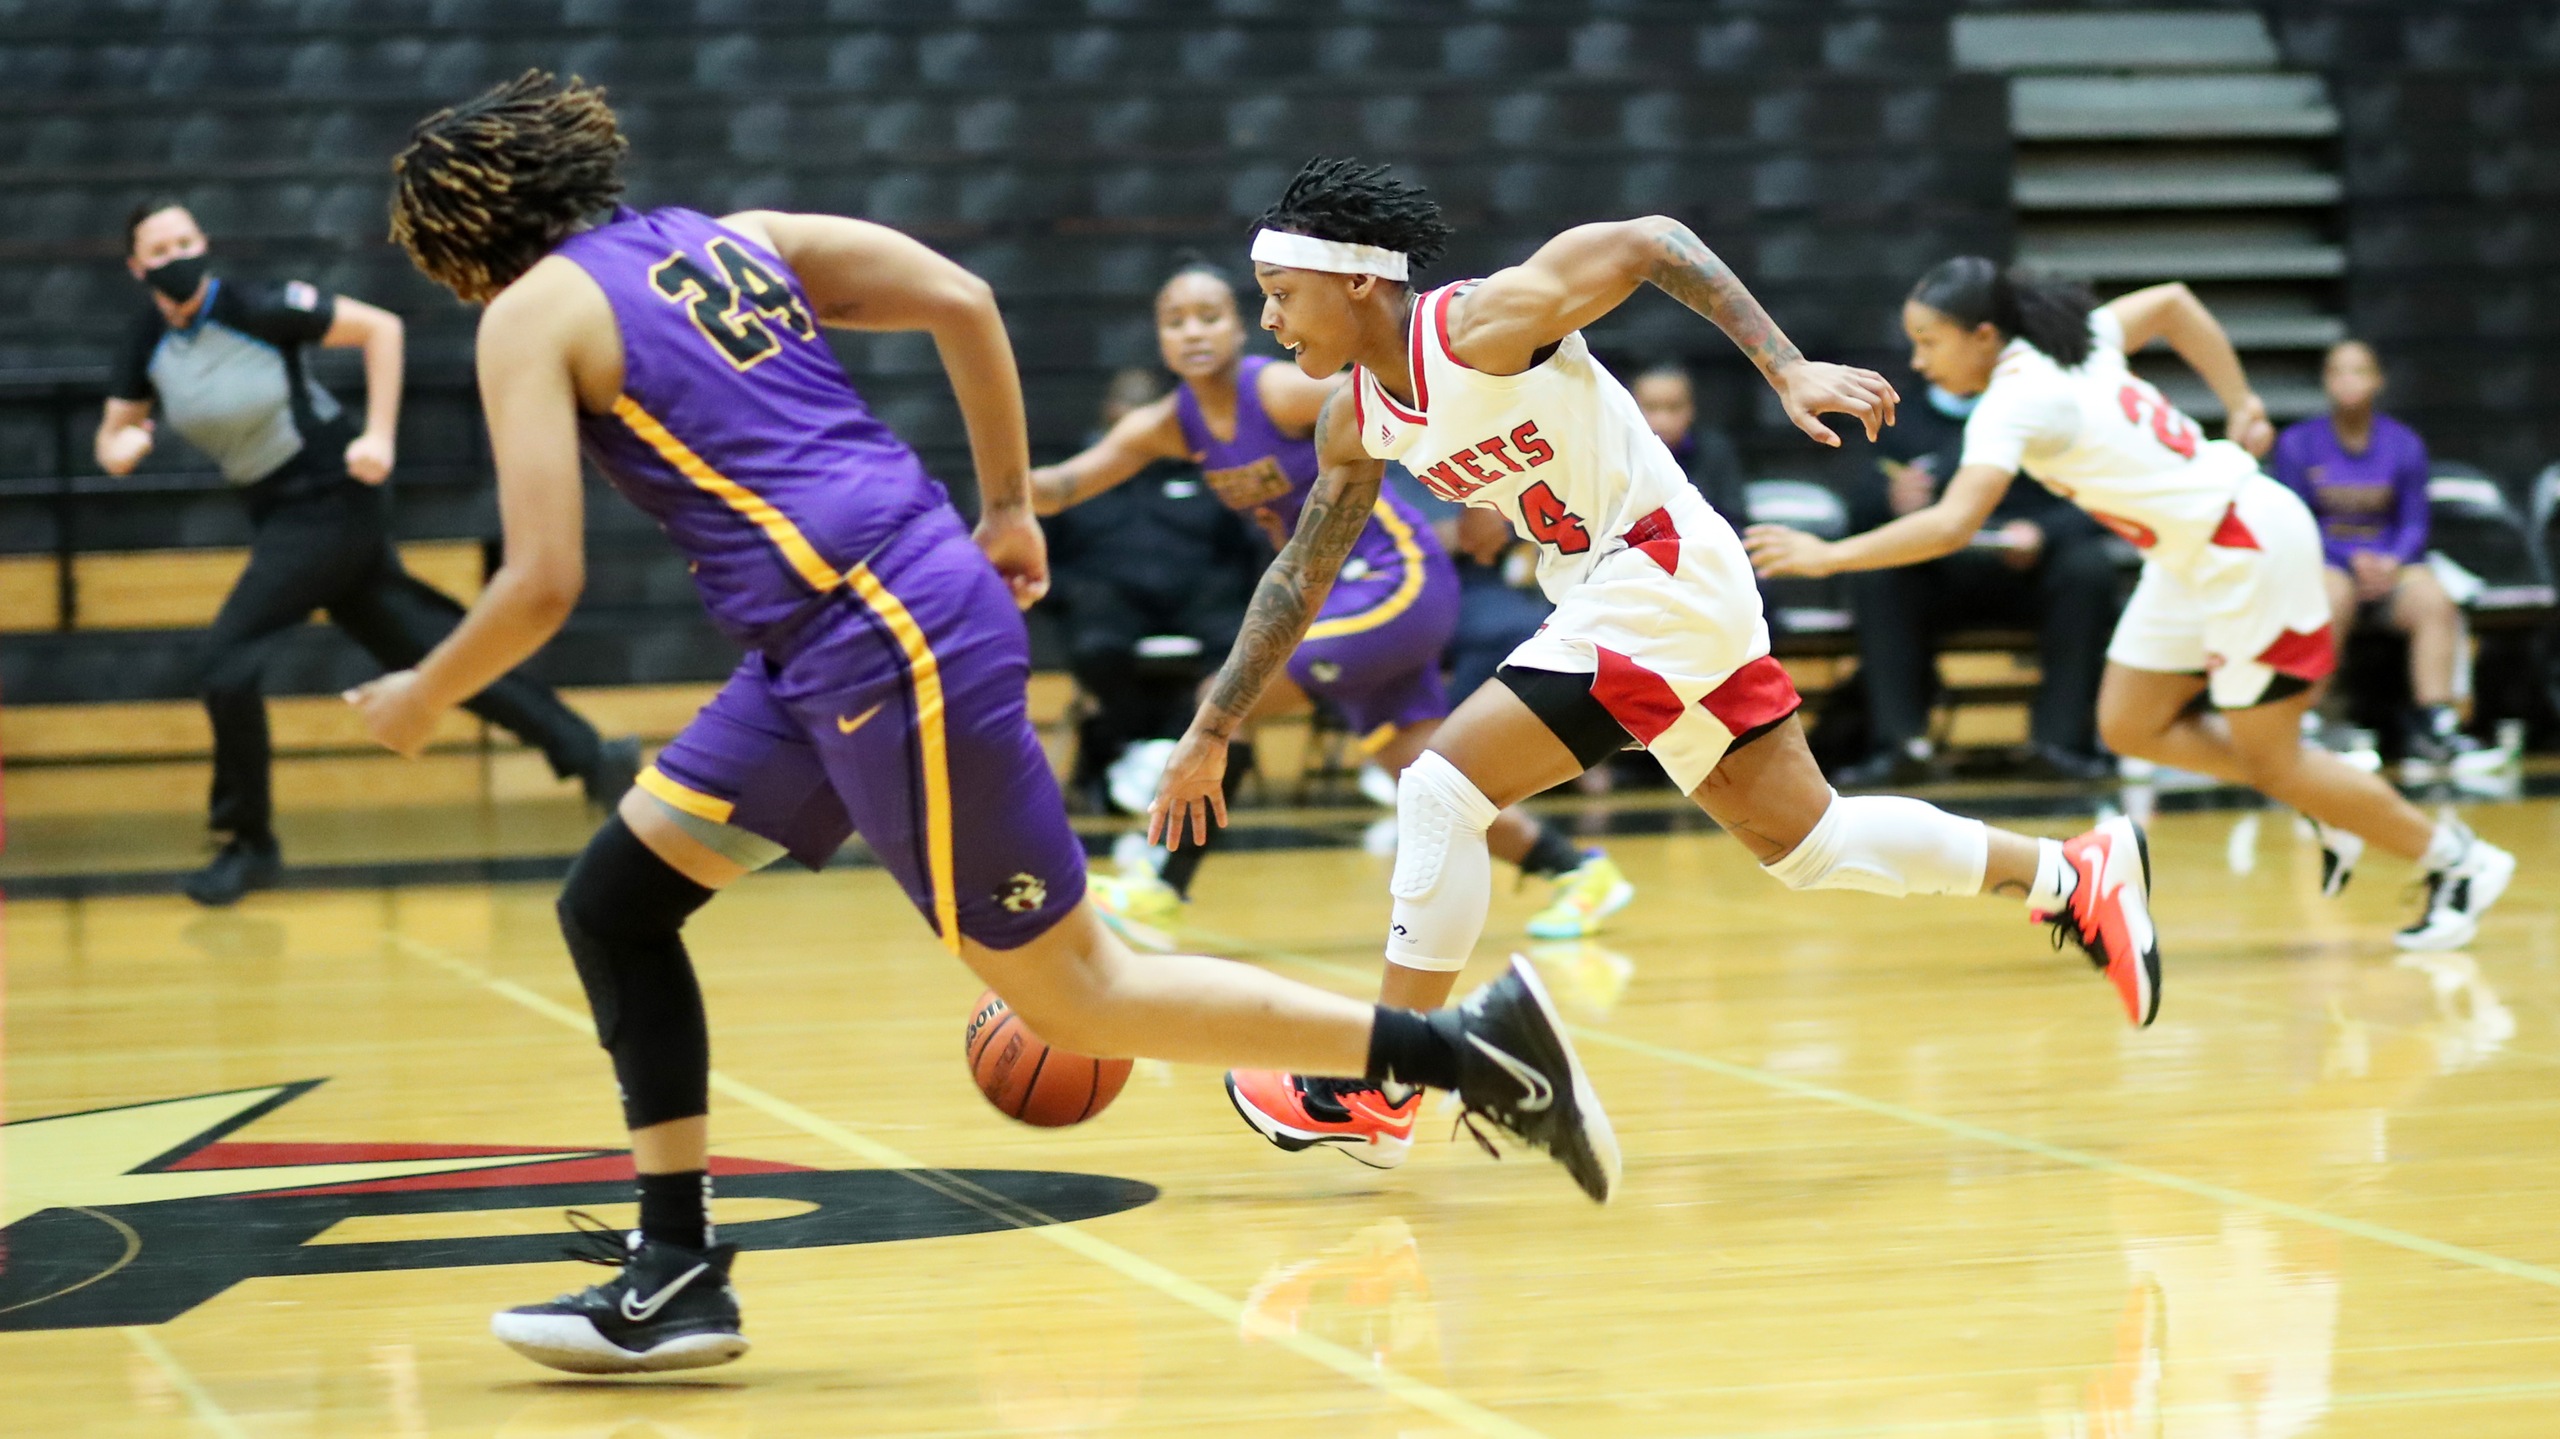 Deajanae Harvey finished the night with a season-high 14 points. Photo by Hugh Cox.